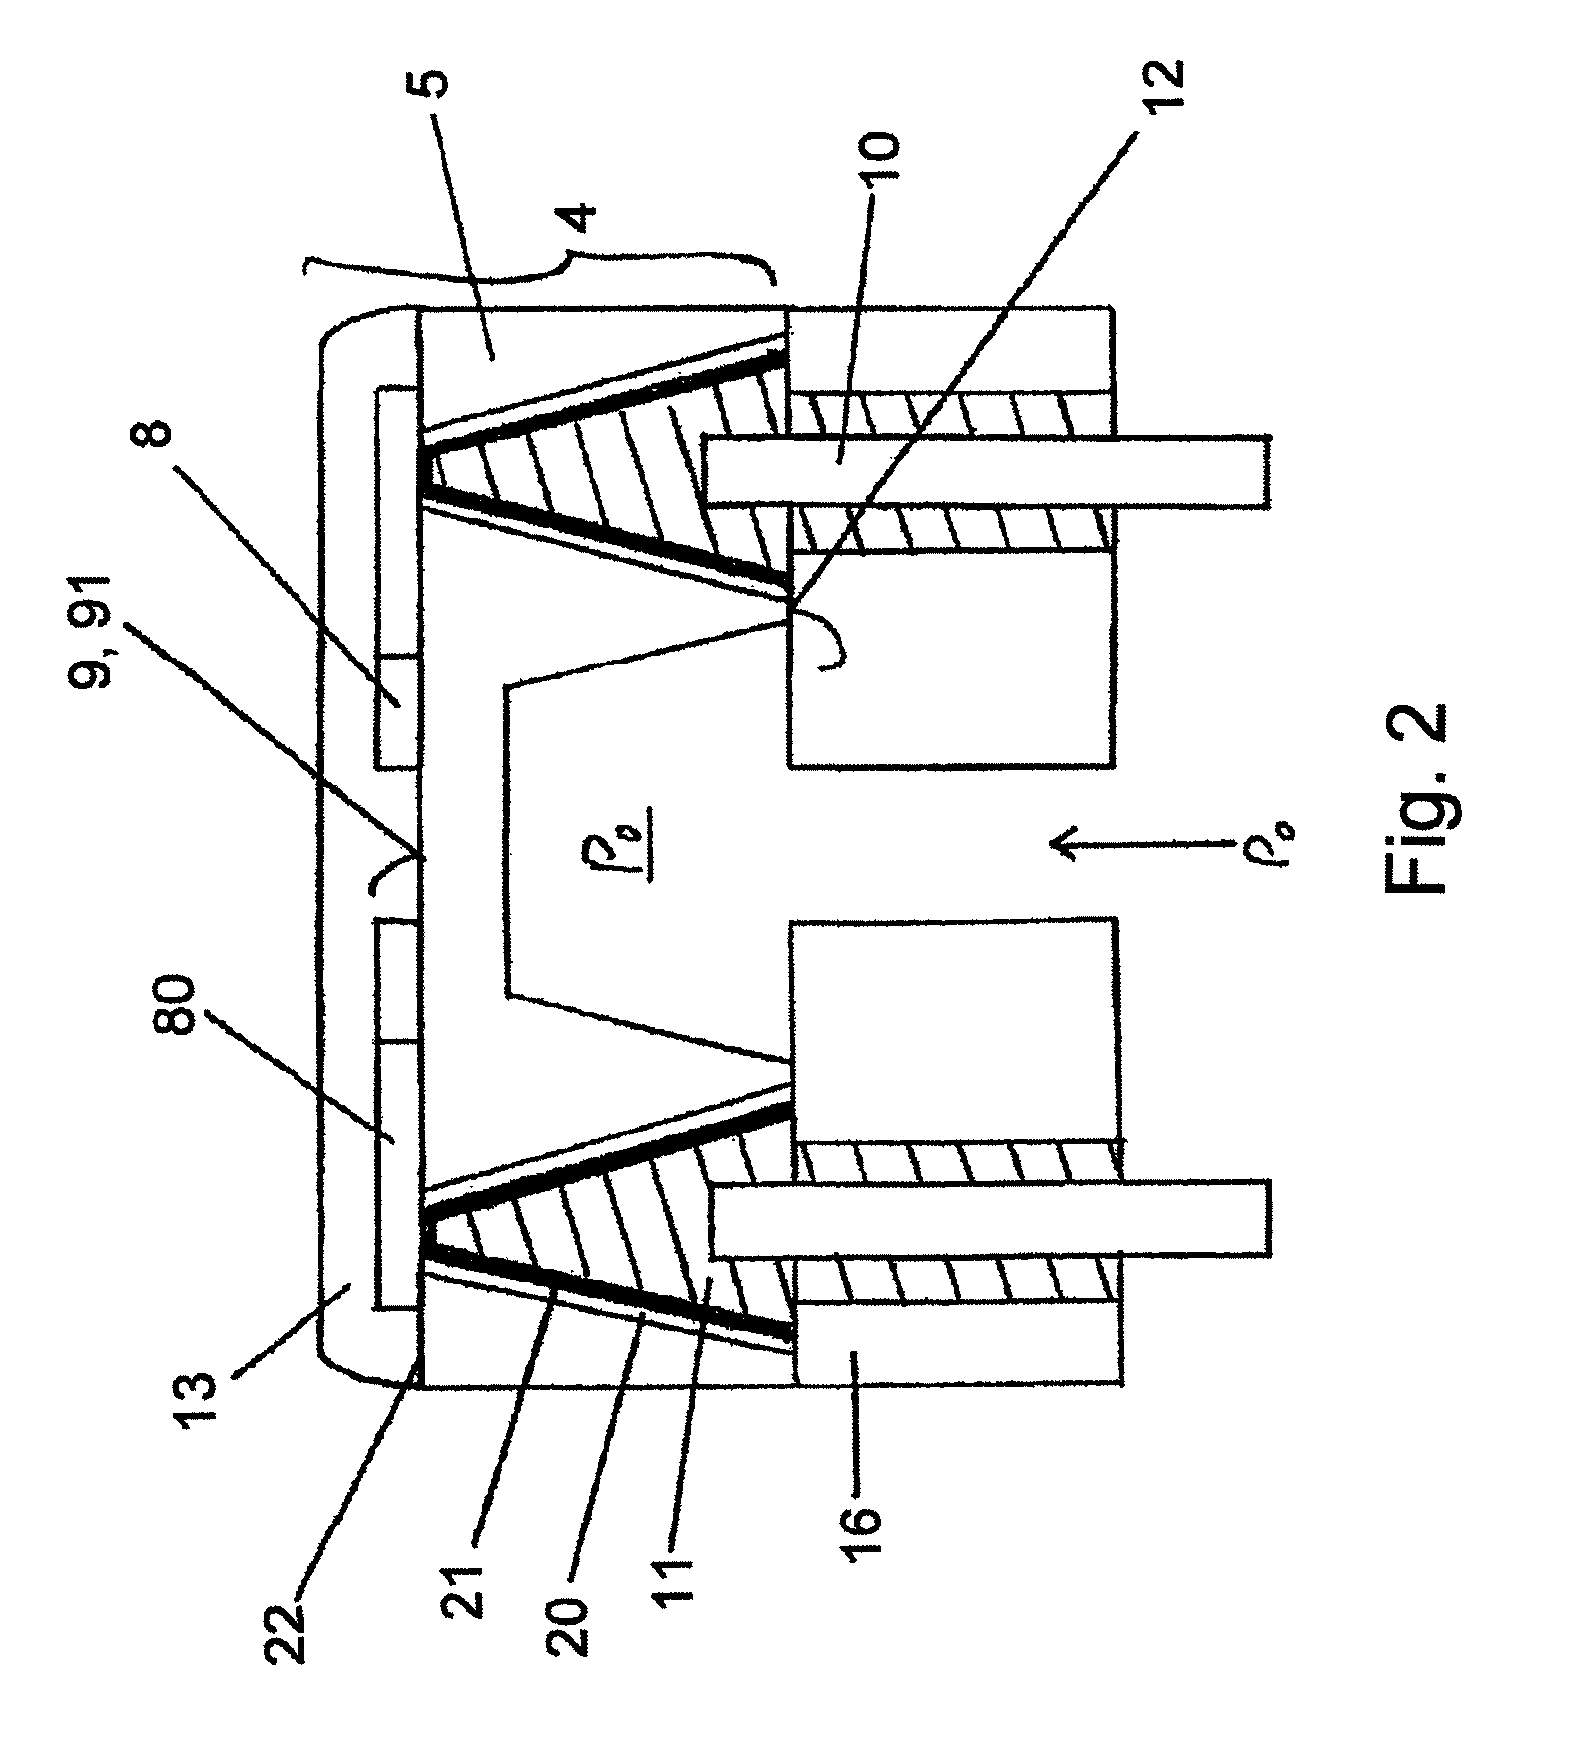 Sensor unit for the measurment of a variable in a medium